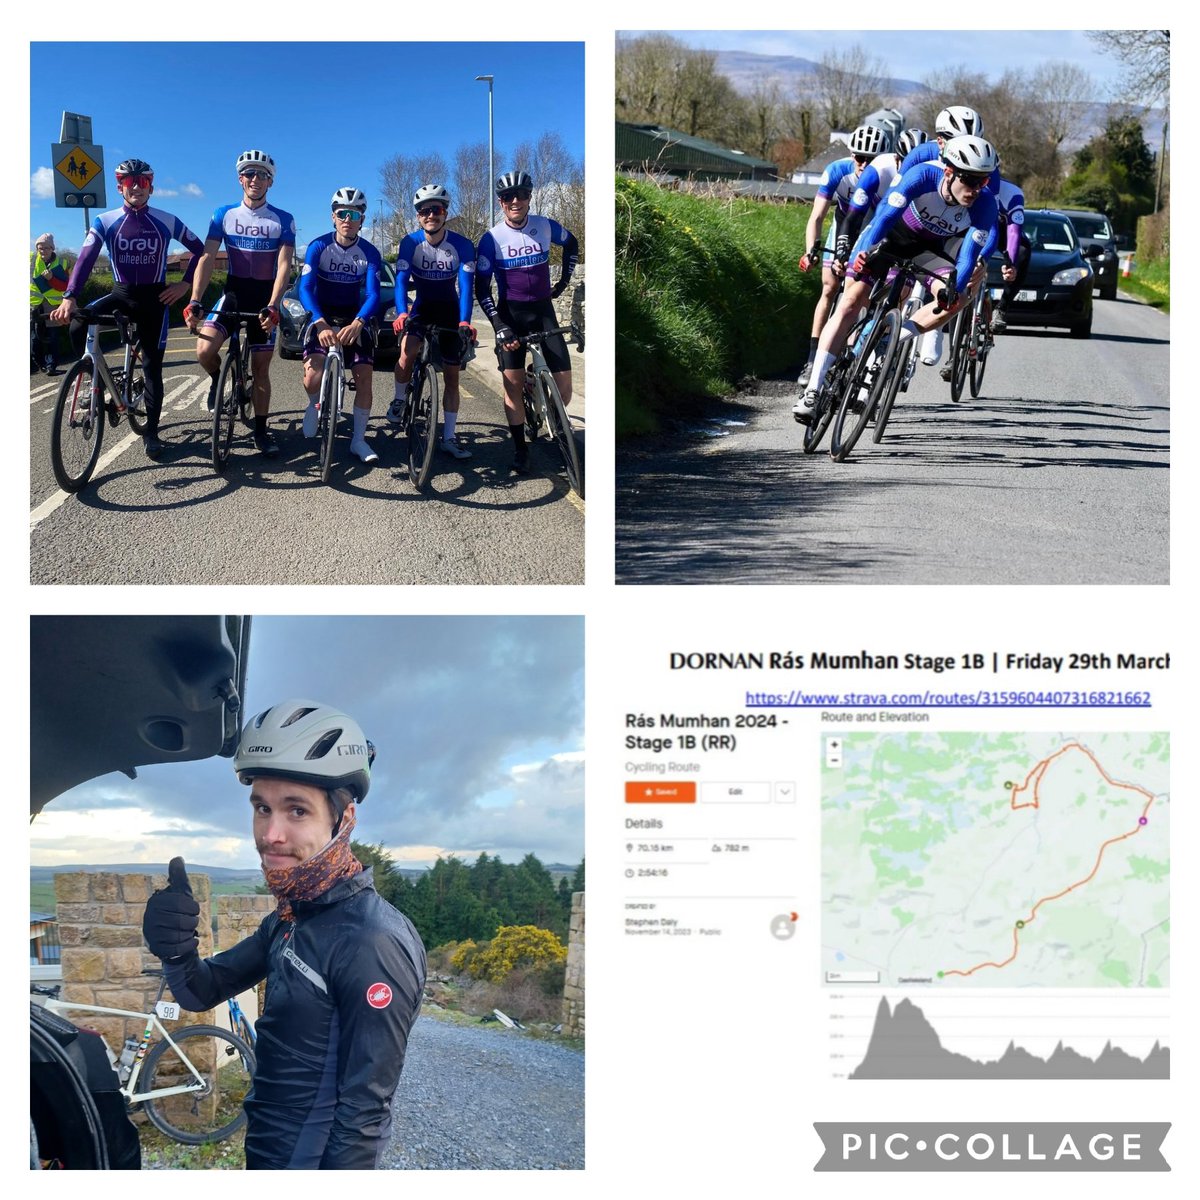 So proud of Conor Insta @cyco___killer and the #BrayWheelers boys Jack, Rob, Anthony & Greg today @Rasmumhan first 2 stages. 20th team already. More fun tomorrow! #RingofKerry @CyclingIreland @bray_ie